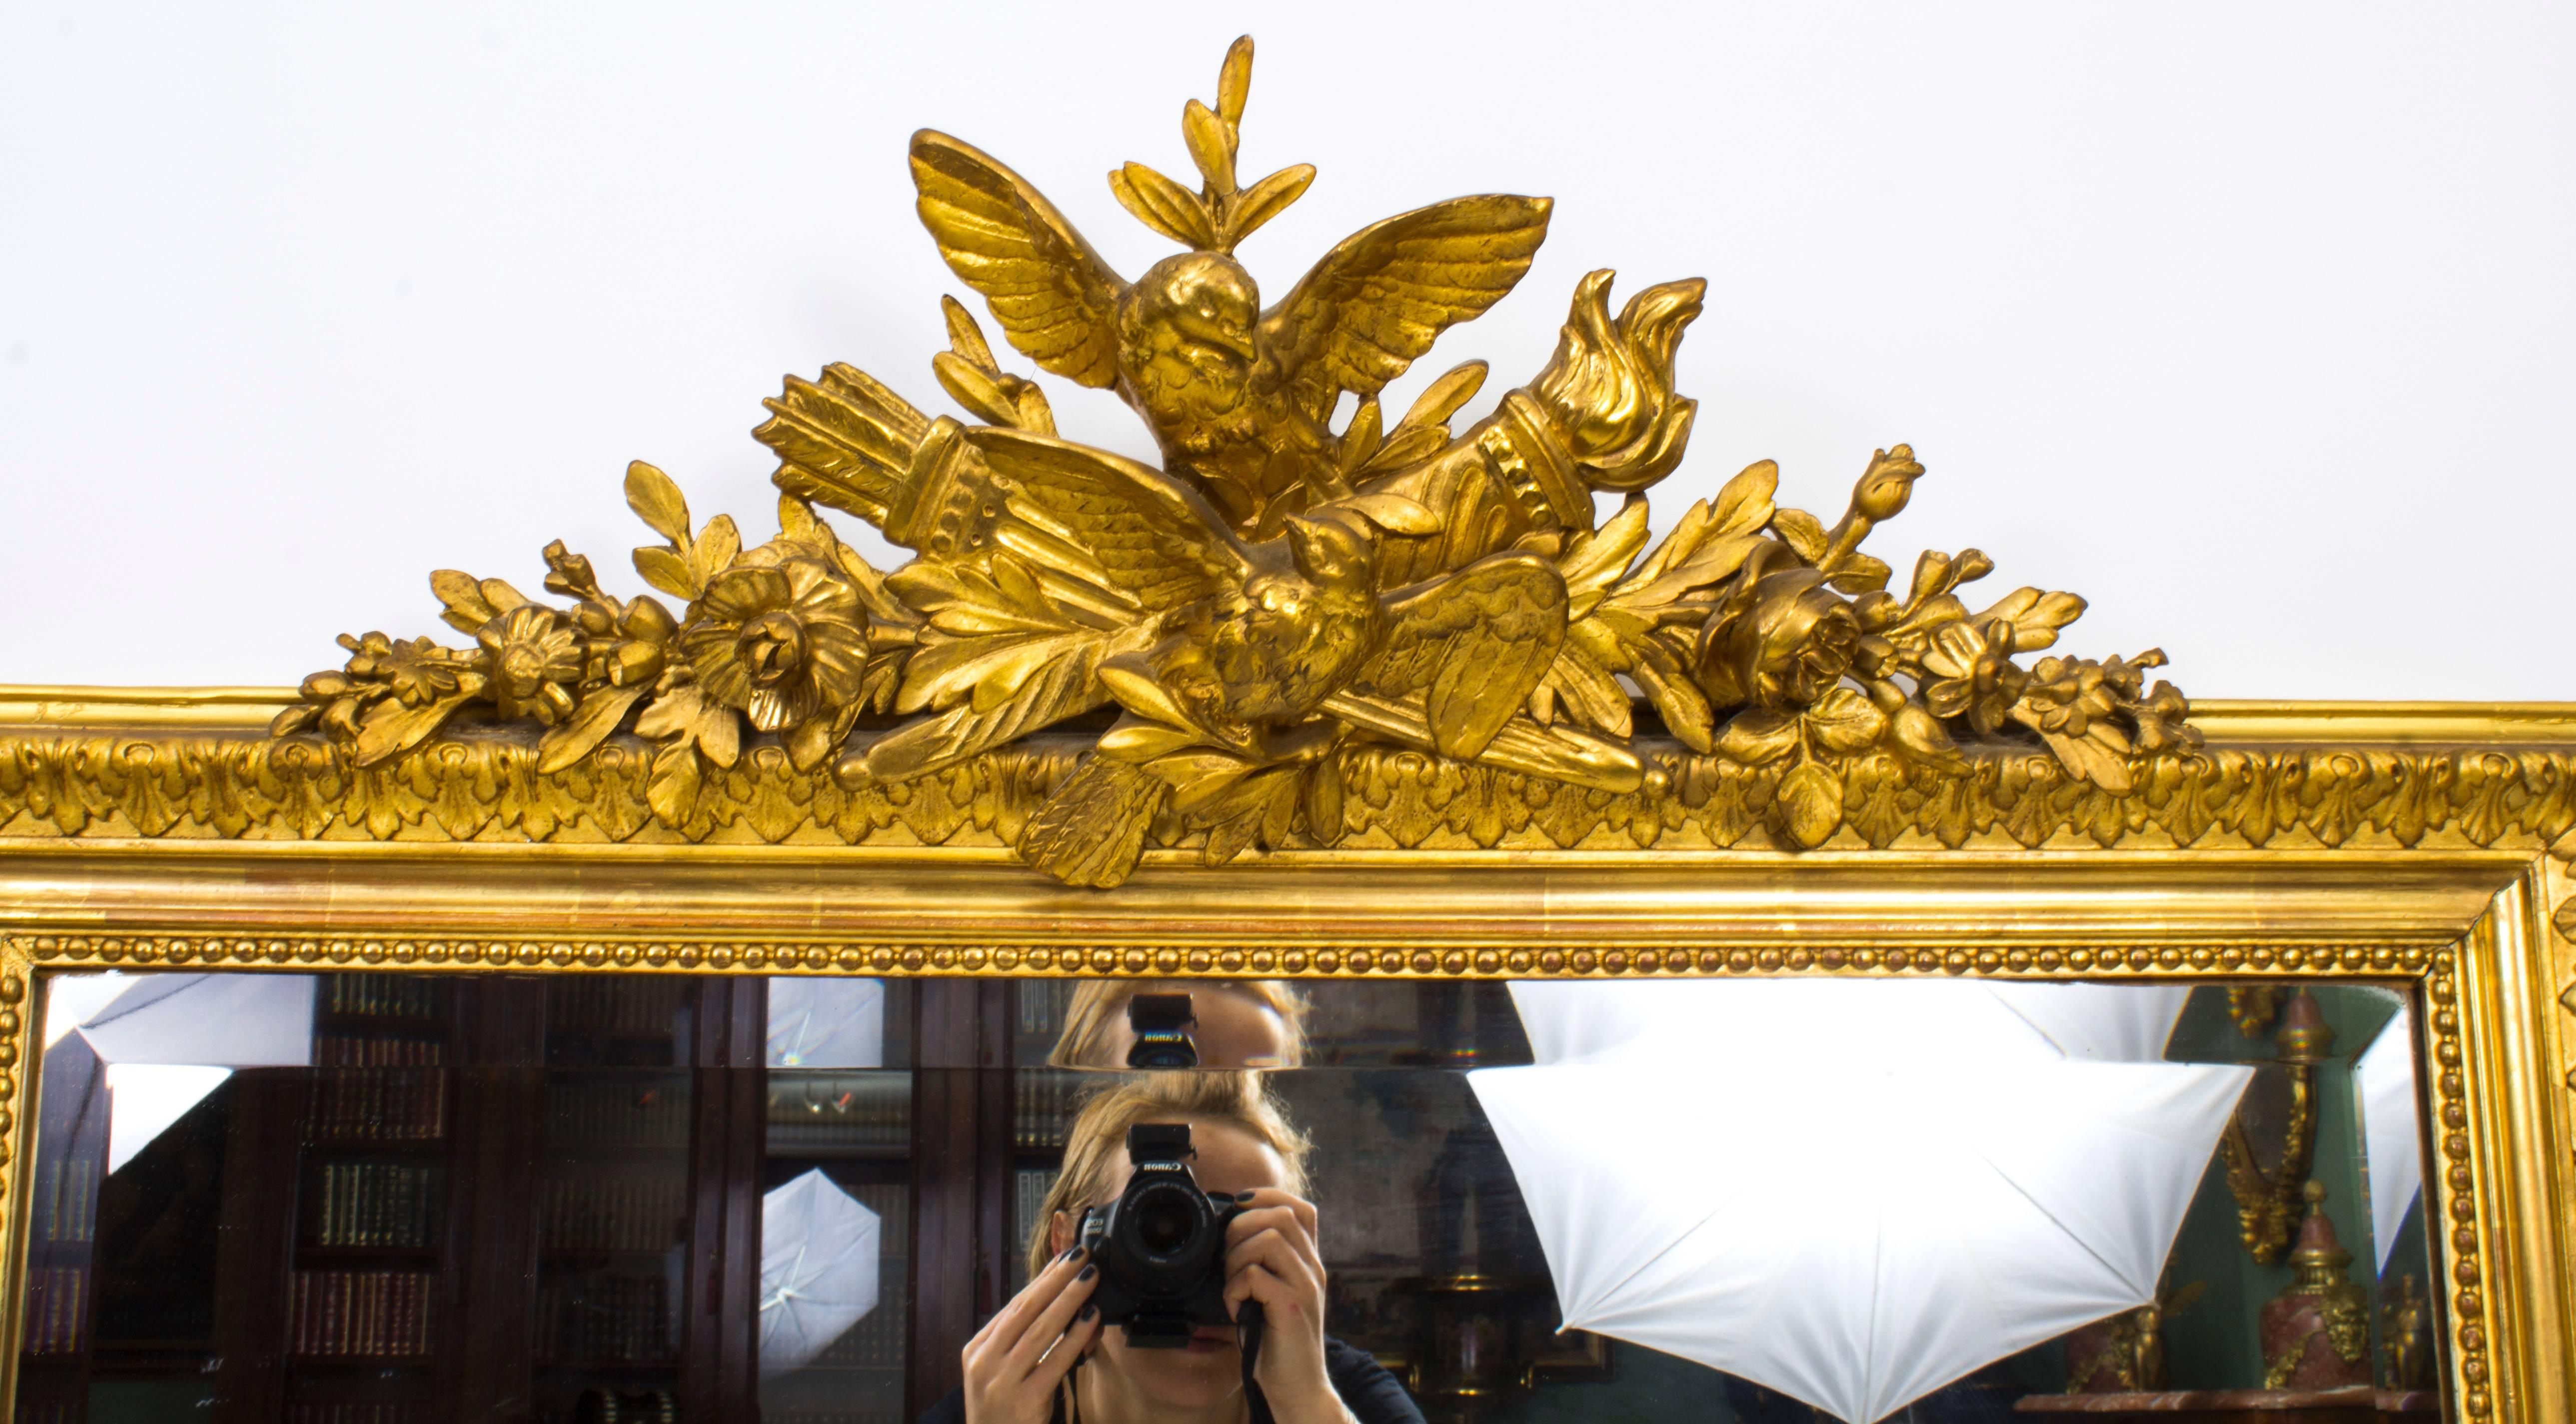 This is a beautiful large antique French carved giltwood overmantel mirror, circa 1860 in date.
The frame is surmounted with a striking carved giltwood central finial with doves, a flaming torch, a quiver of arrows and foliate and floral